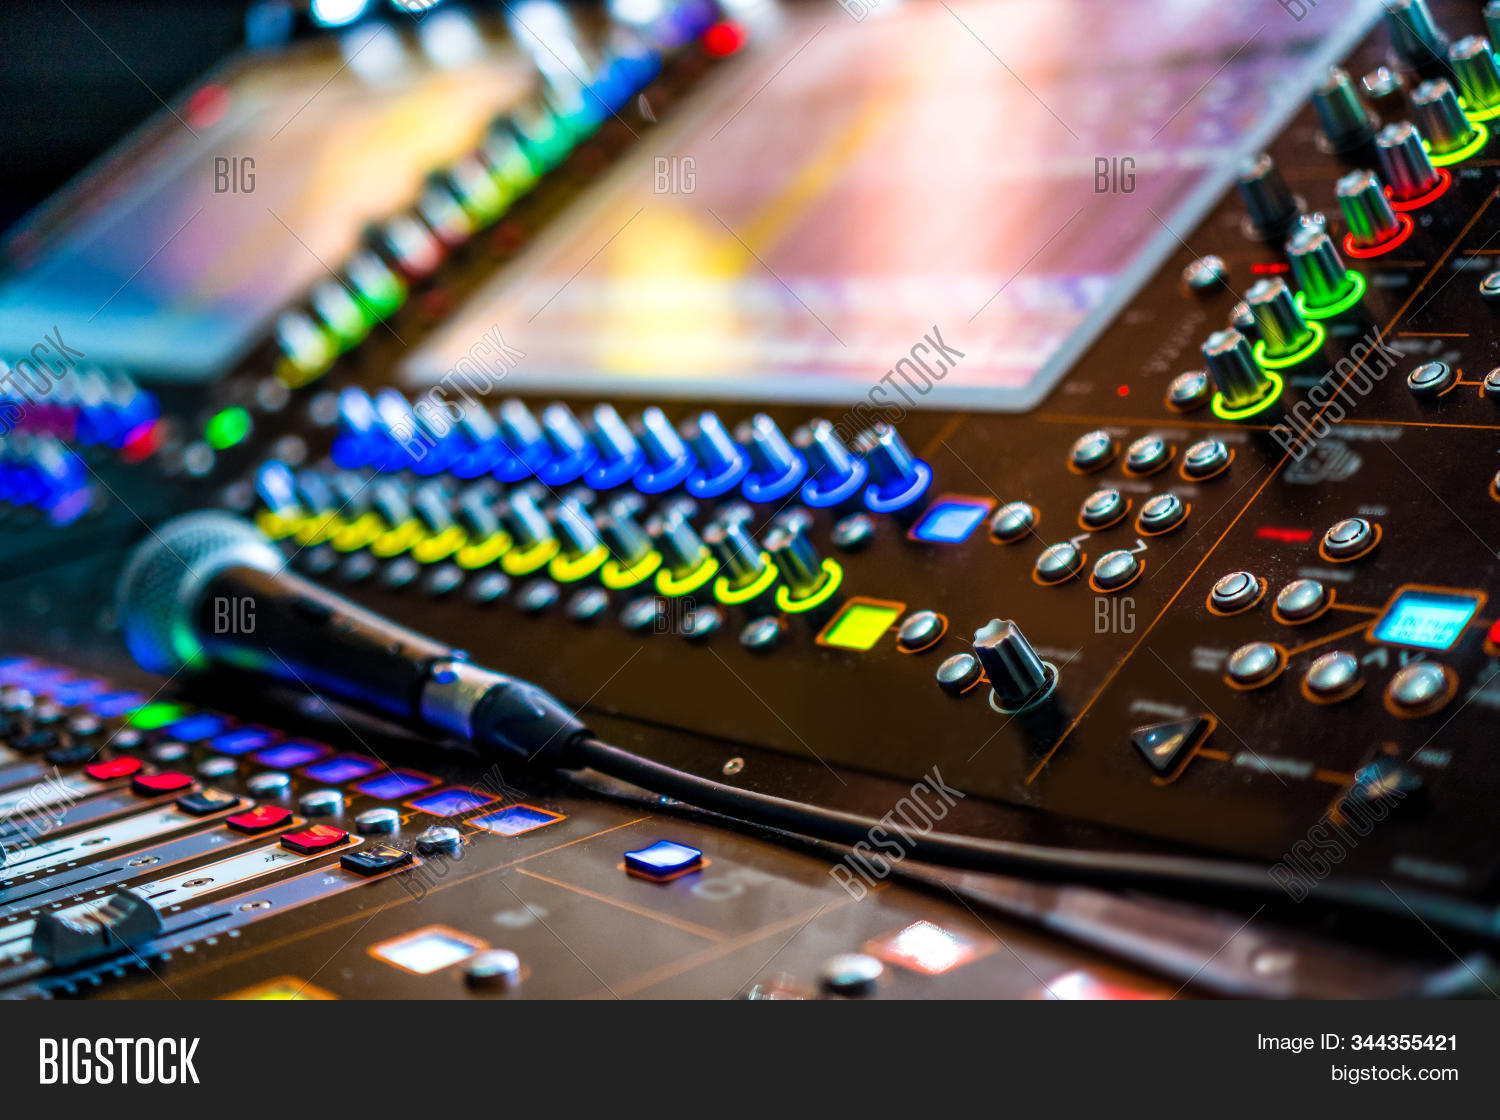 Sound Effects Image Photo Trial Bigstock